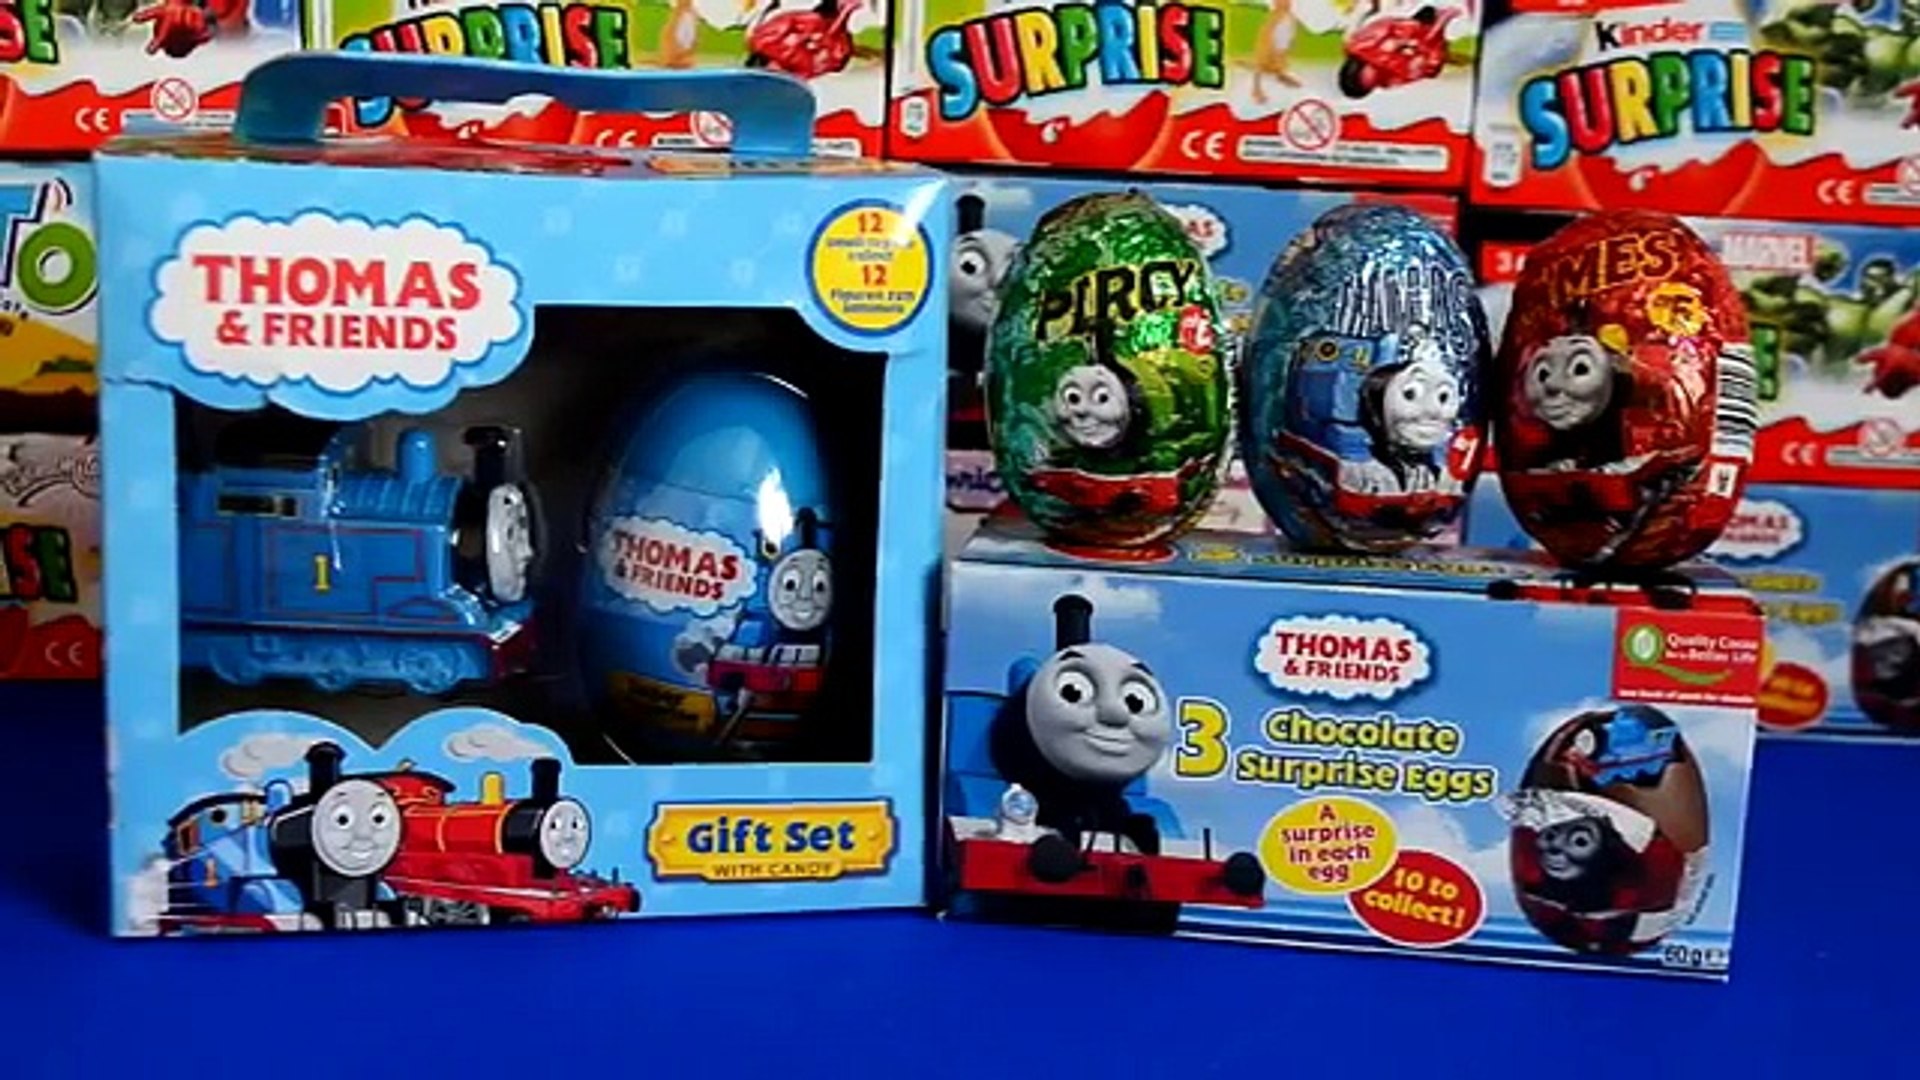 Thomas and Friends Surprise Egg Easter 